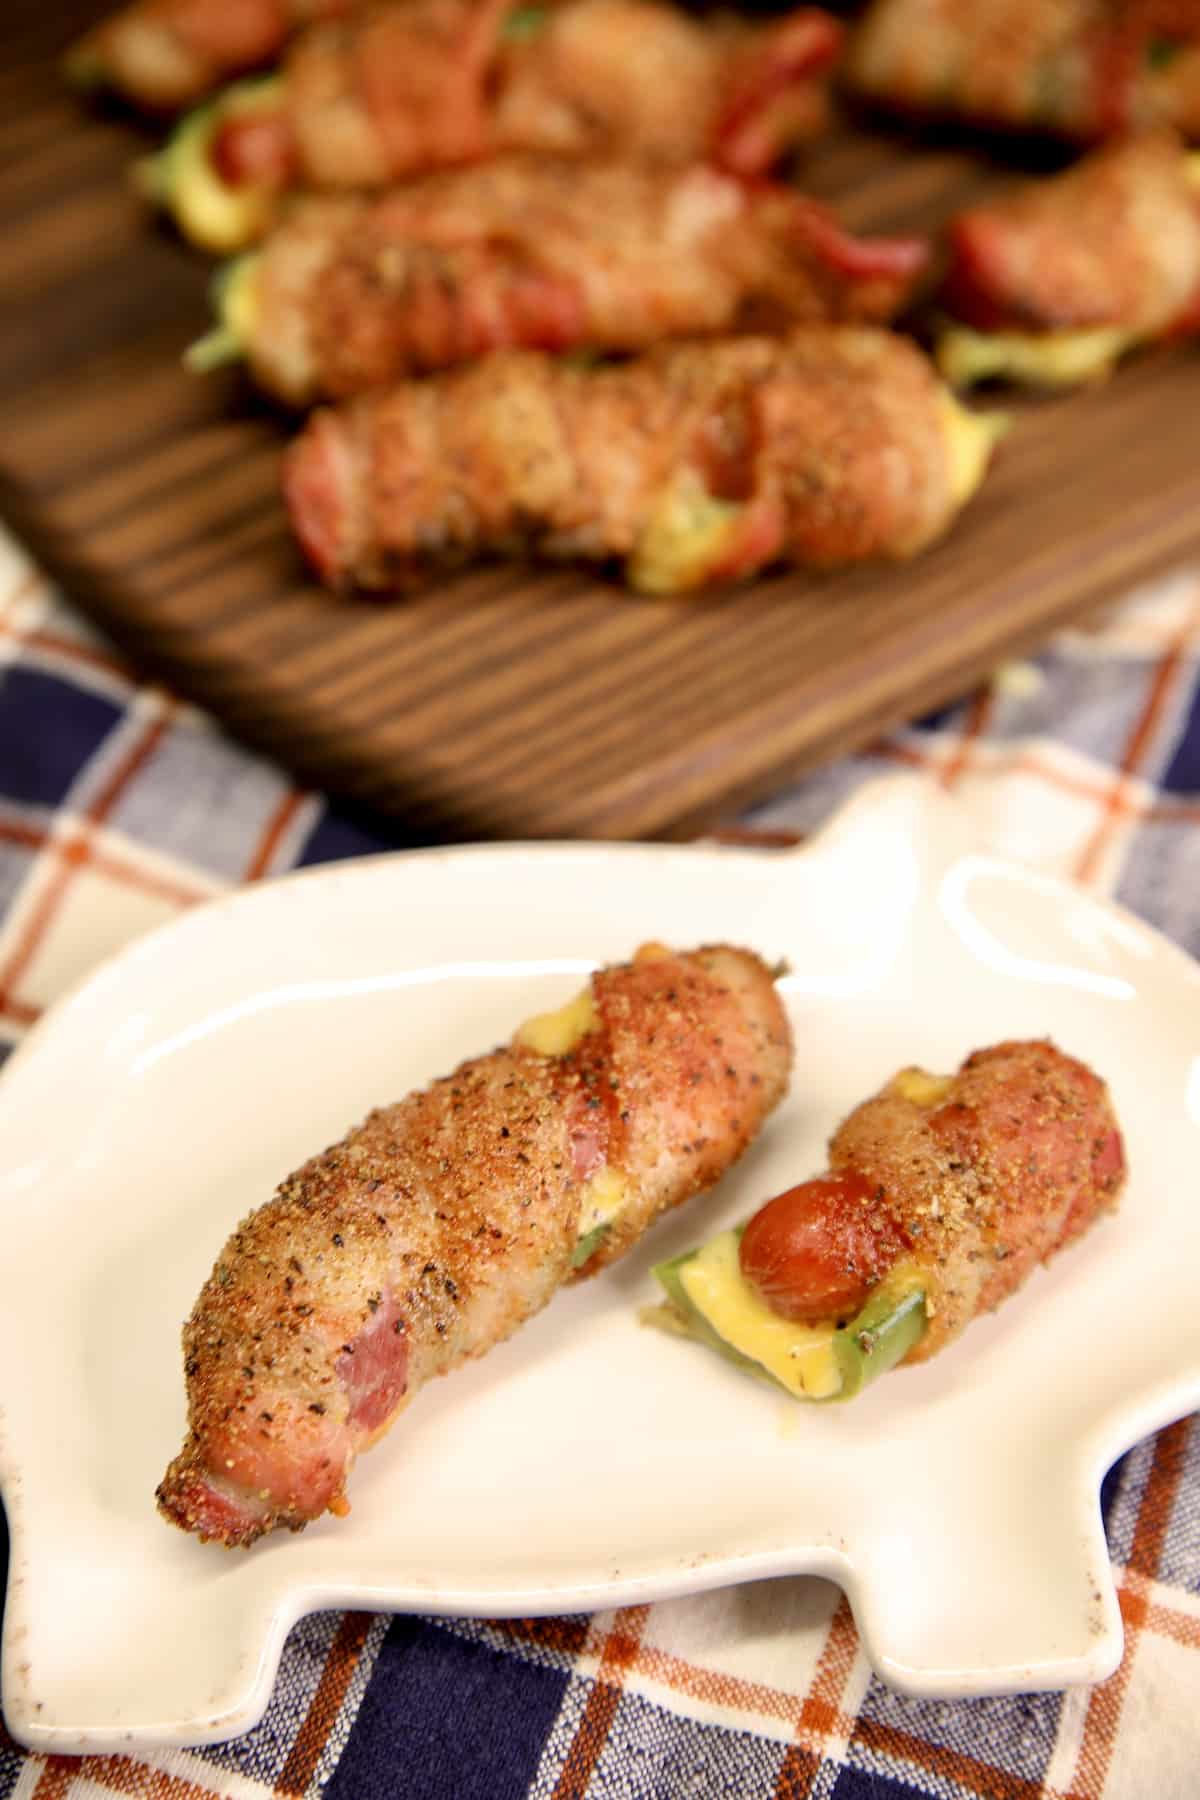 Small plate with jalapeno poppers stuffed with cheese and little smokies.